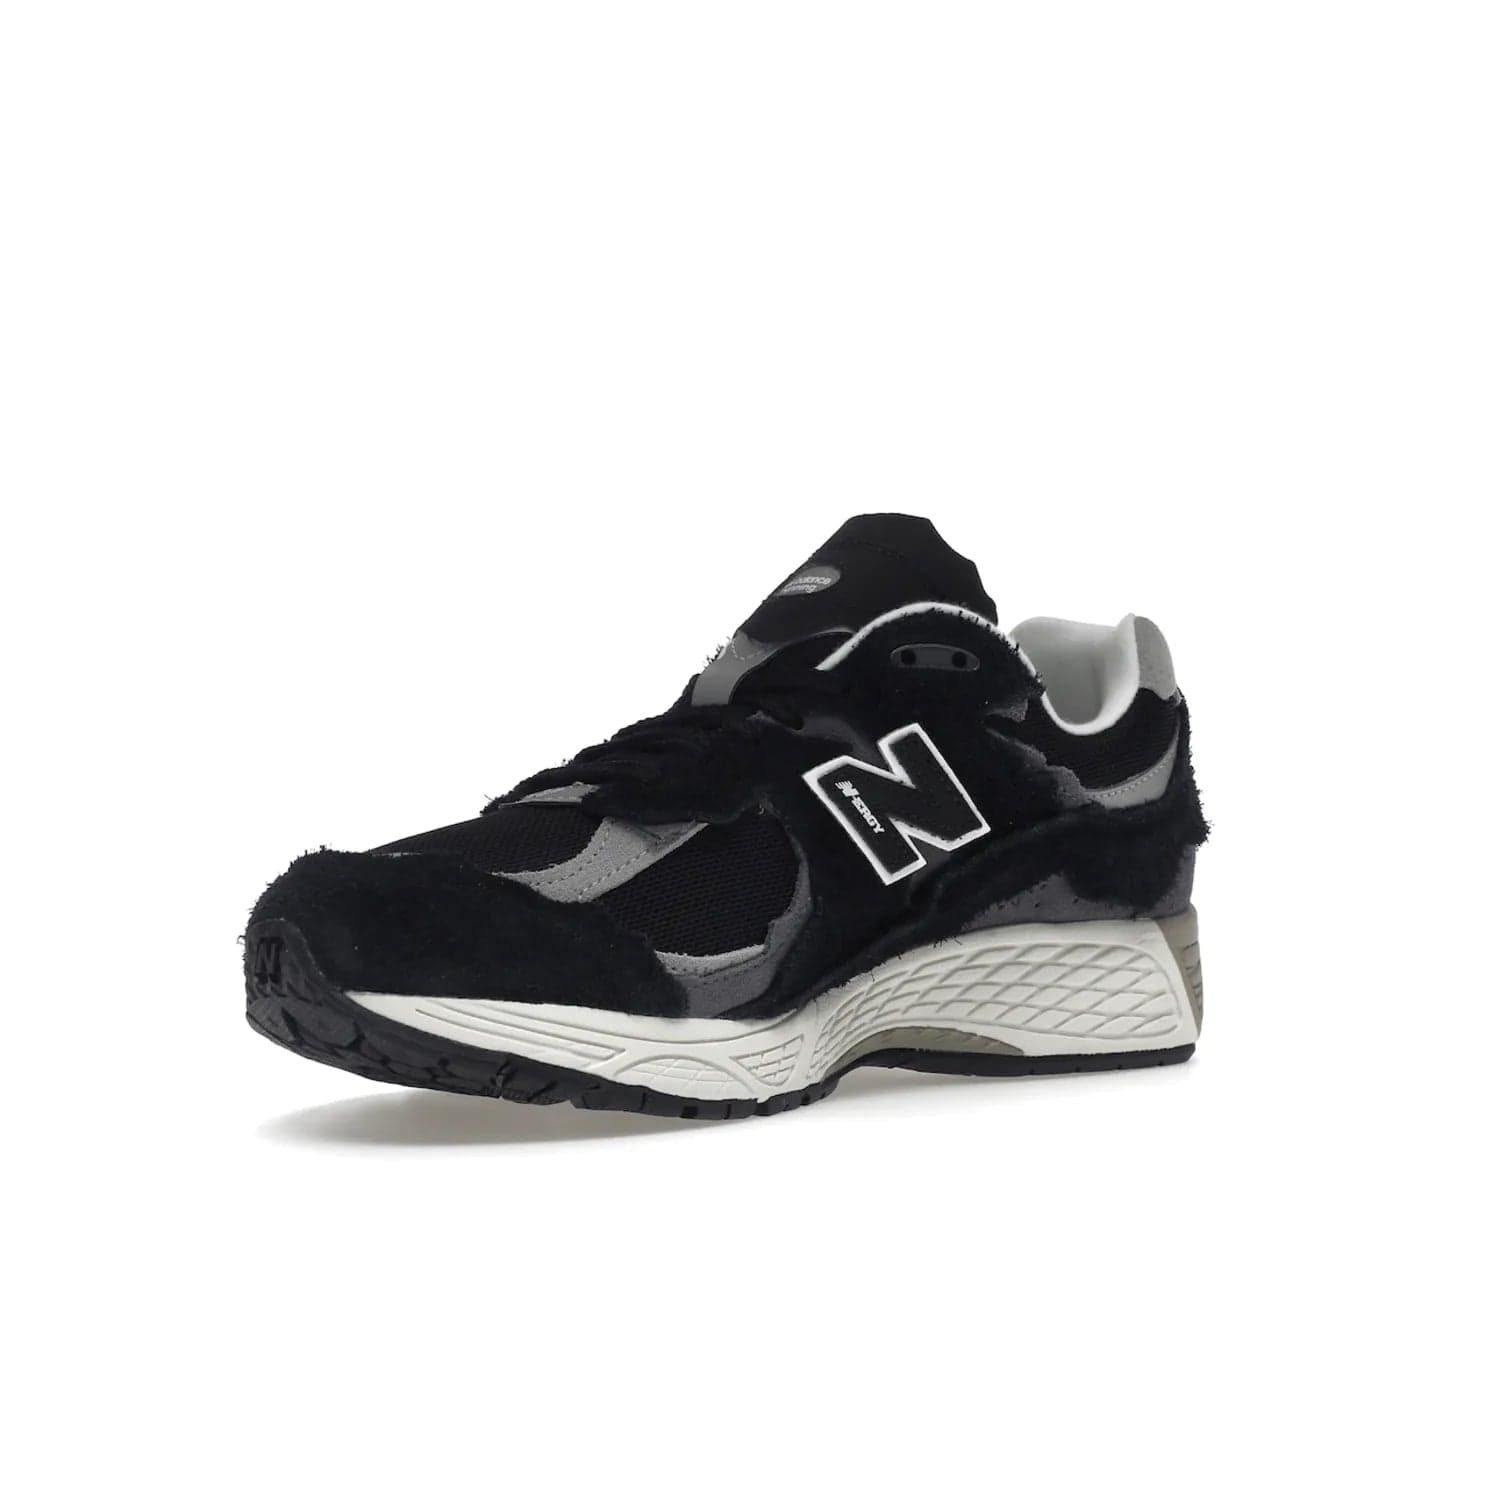 New Balance 2002R Protection Pack Black Grey - Image 15 - Only at www.BallersClubKickz.com - Look stylish in the New Balance 2002R Protection Pack Black Grey. Uppers constructed from premium materials like mesh and synthetic overlays. Iconic "N" emblem appears in white and black. ABZORB midsole for shock absorption and responsiveness. Black outsole for grip and traction. Lacing system offers customized fit and cushioned tongue and collar offer comfort and stability. Step up your style with this must-hav